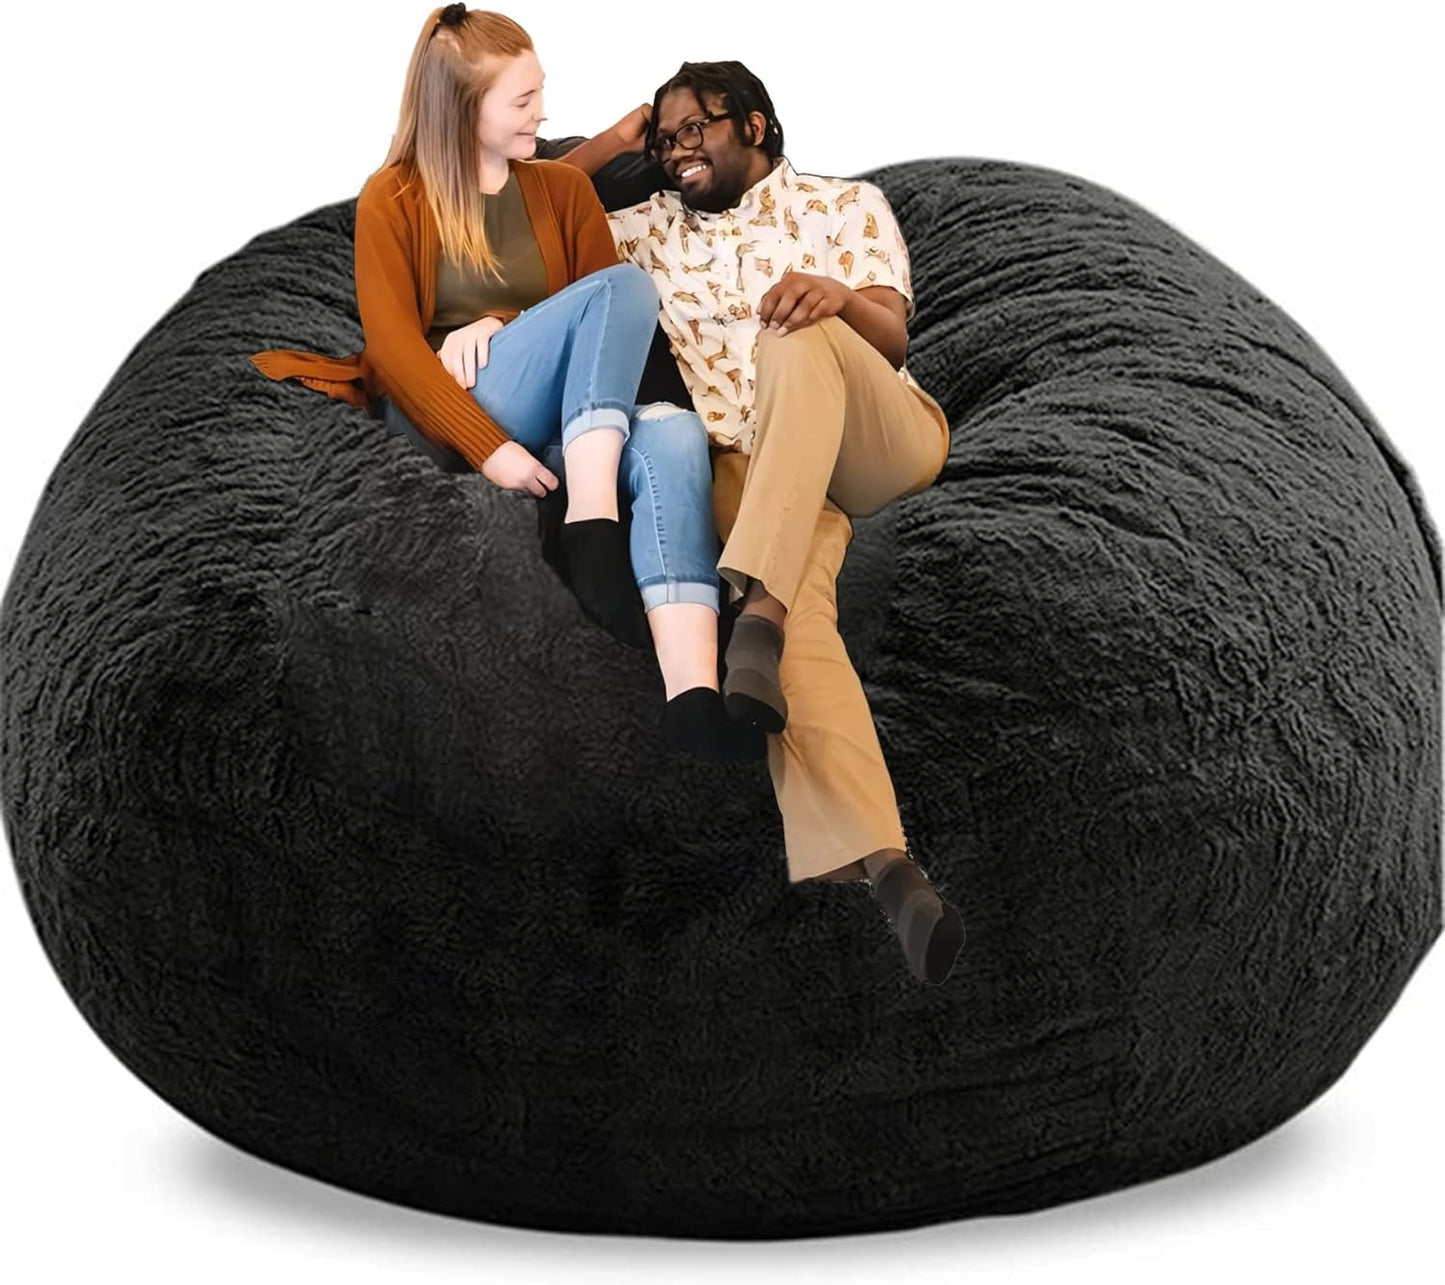 Giant Bean Bag Cover, Soft Velvet Bean Bag Chairs for Adults (Cover ONLY, NO Filler) 7Ft Dark Grey Big Bean Bag Bed Oversized Lazy Couch